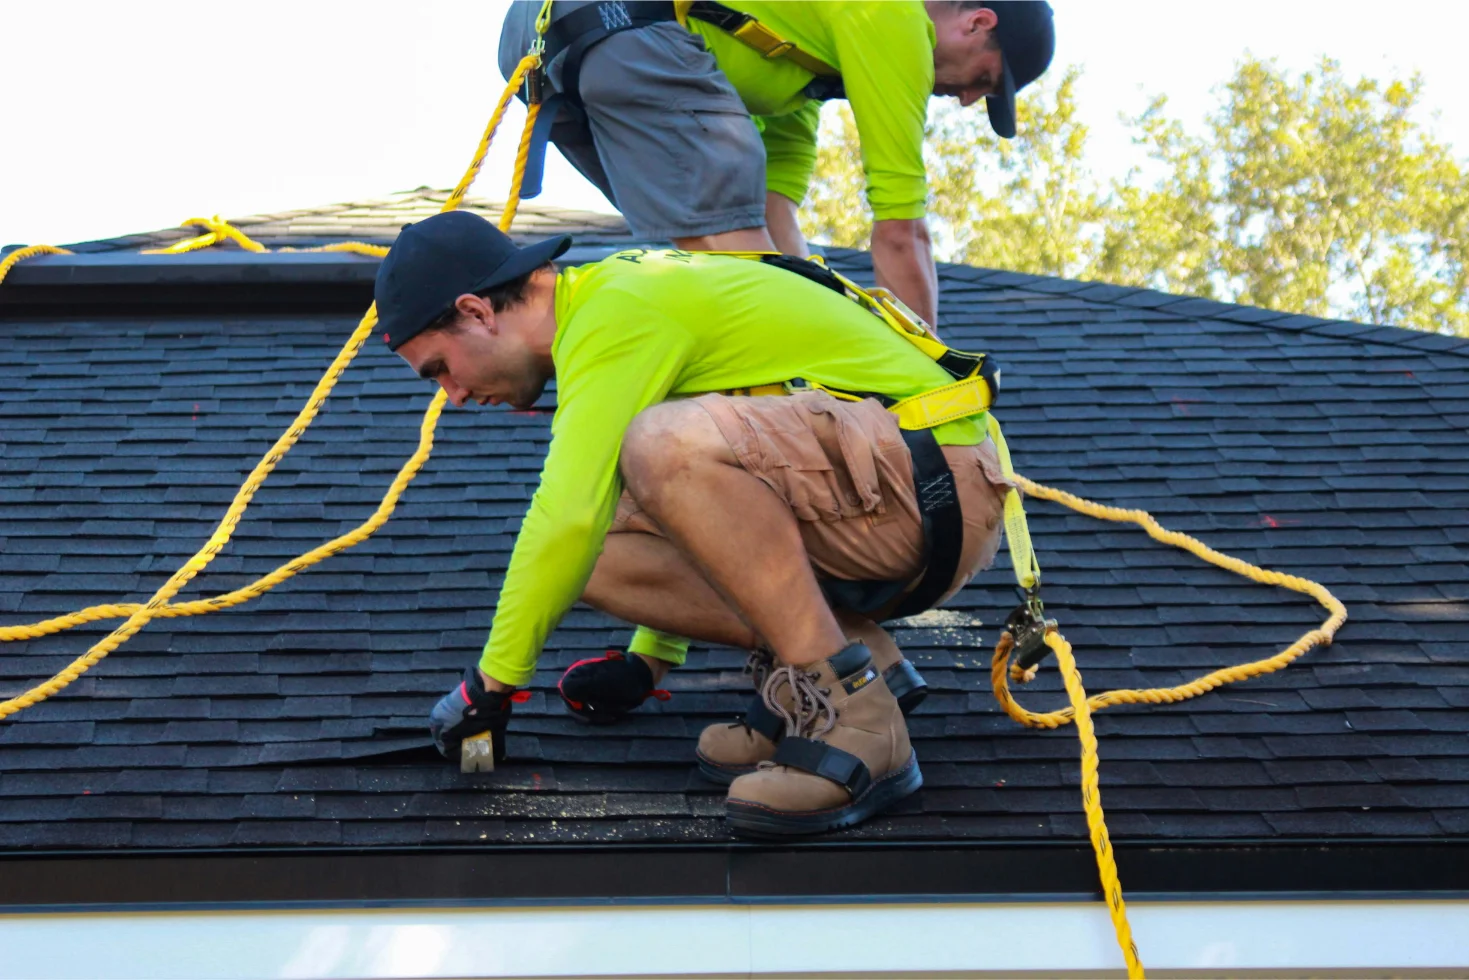 Regular maintenance from a professional roof contractor is essential